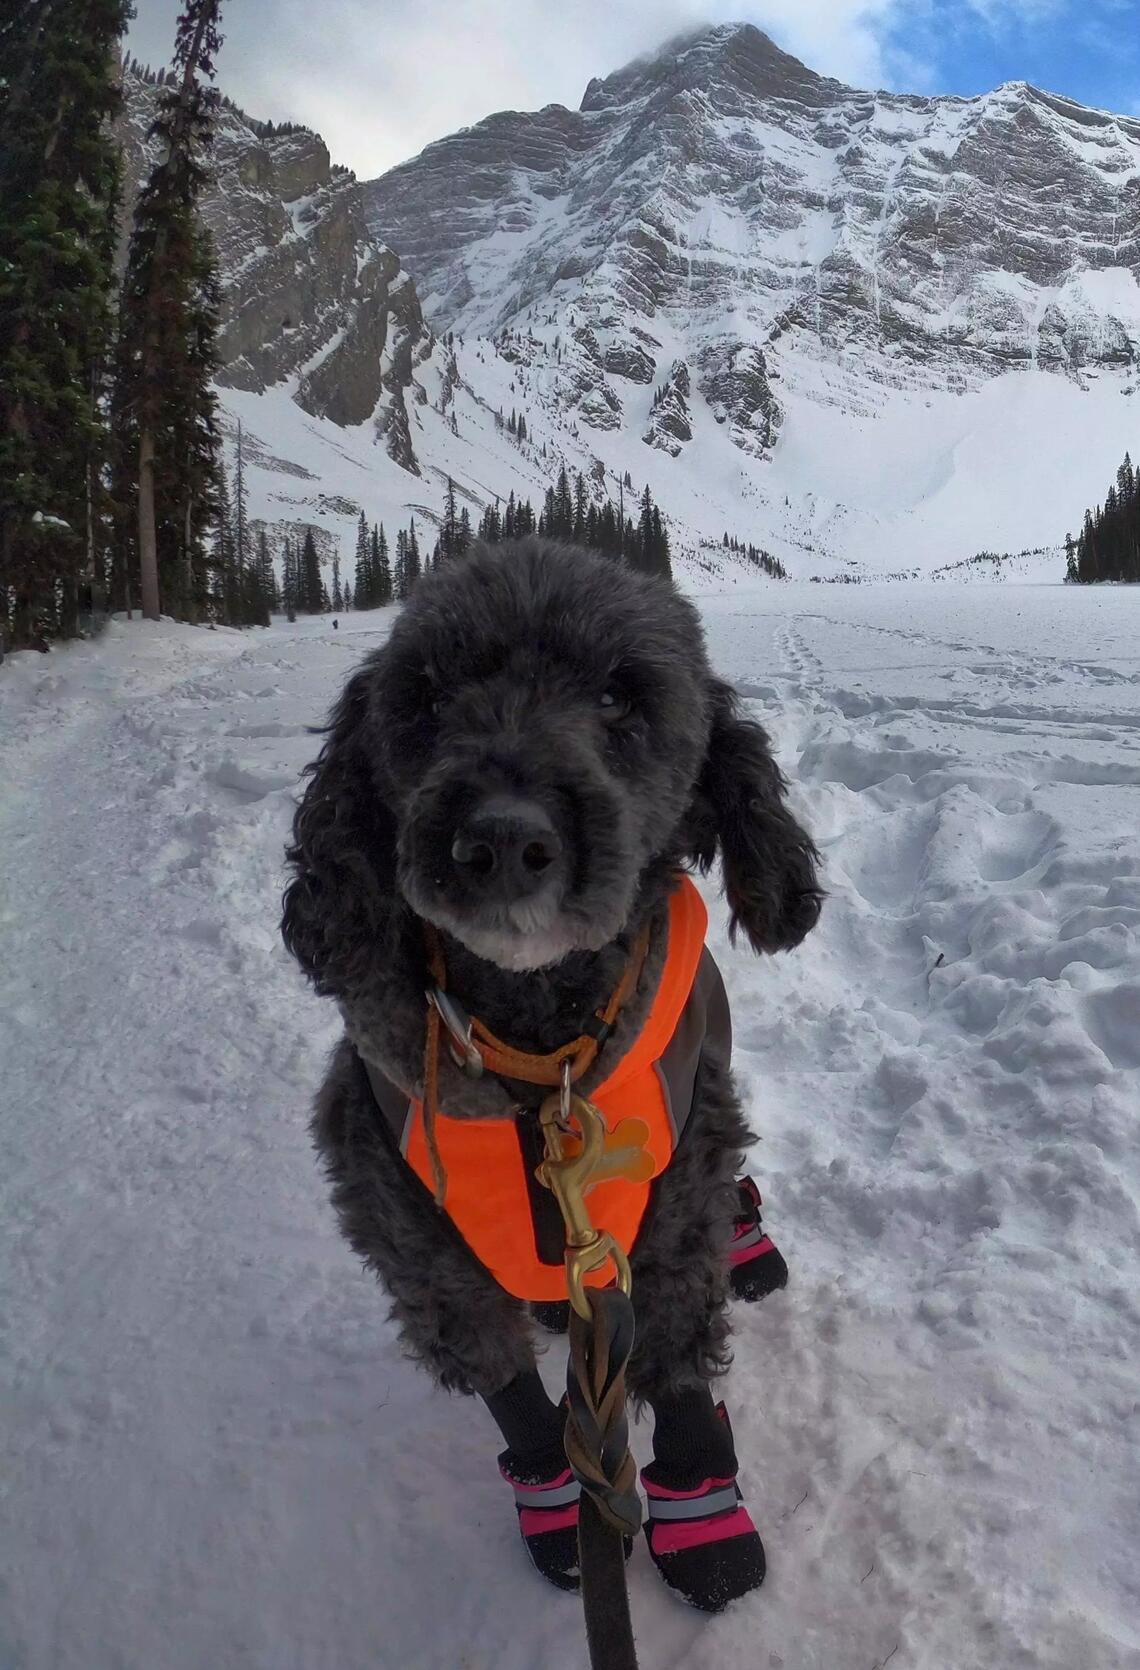 A fluffy grey dog wearing an orange harness stands in the snow in front of a mountain